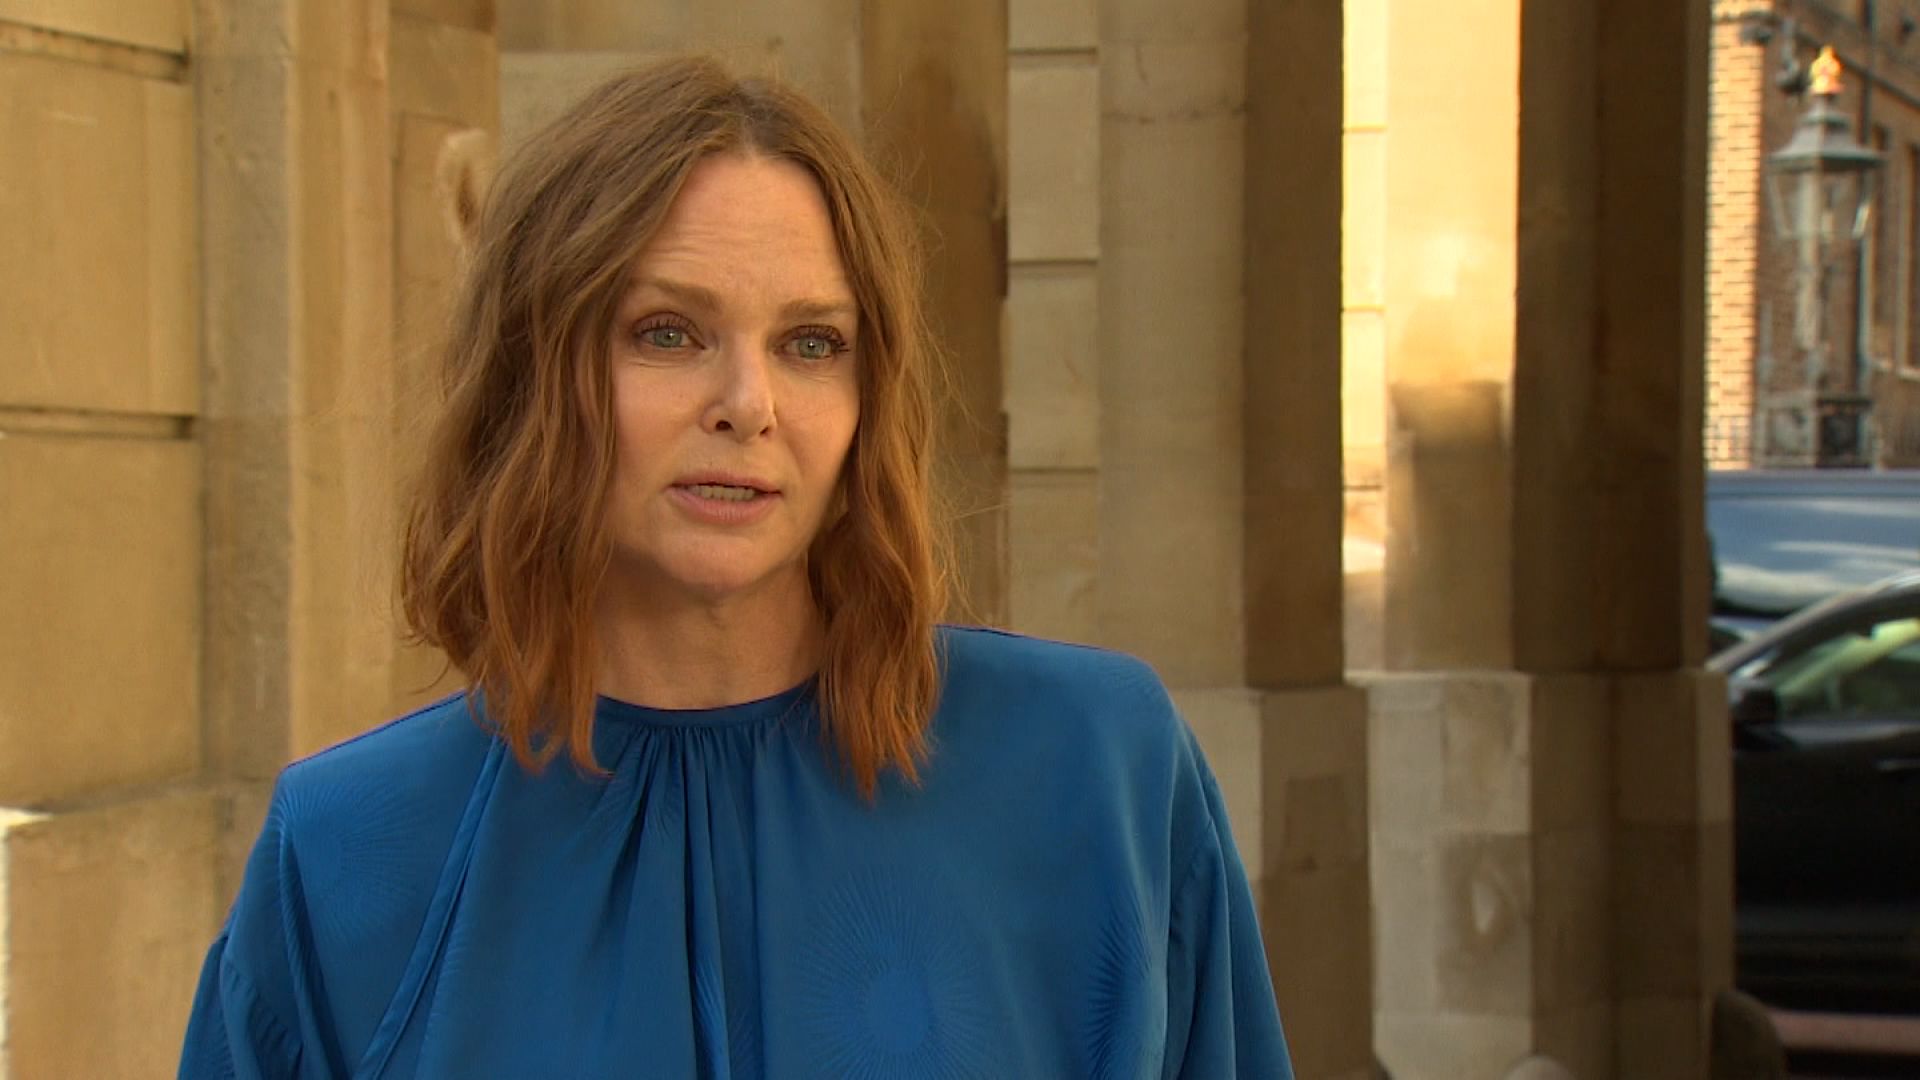 Stella McCartney calls out fashion industry for unethical practices